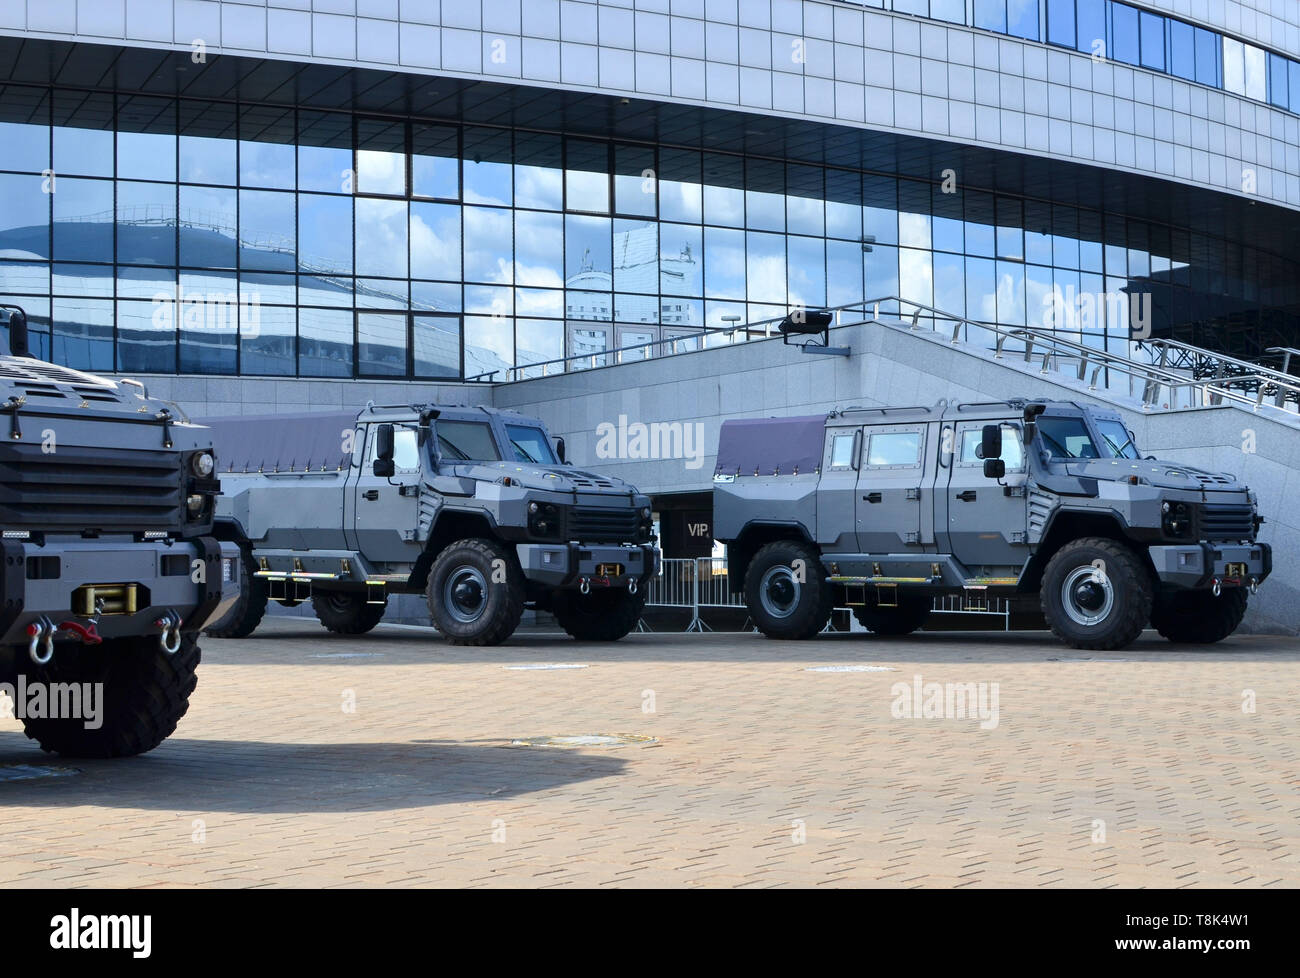 13052019-minsk-belarus-military-exhibition-milex-2019-new-russian-military-armored-car-4x4-%60buran%60-manufactured-%60rida-holding%60-made-on-the-basis-T8K4W1.jpg